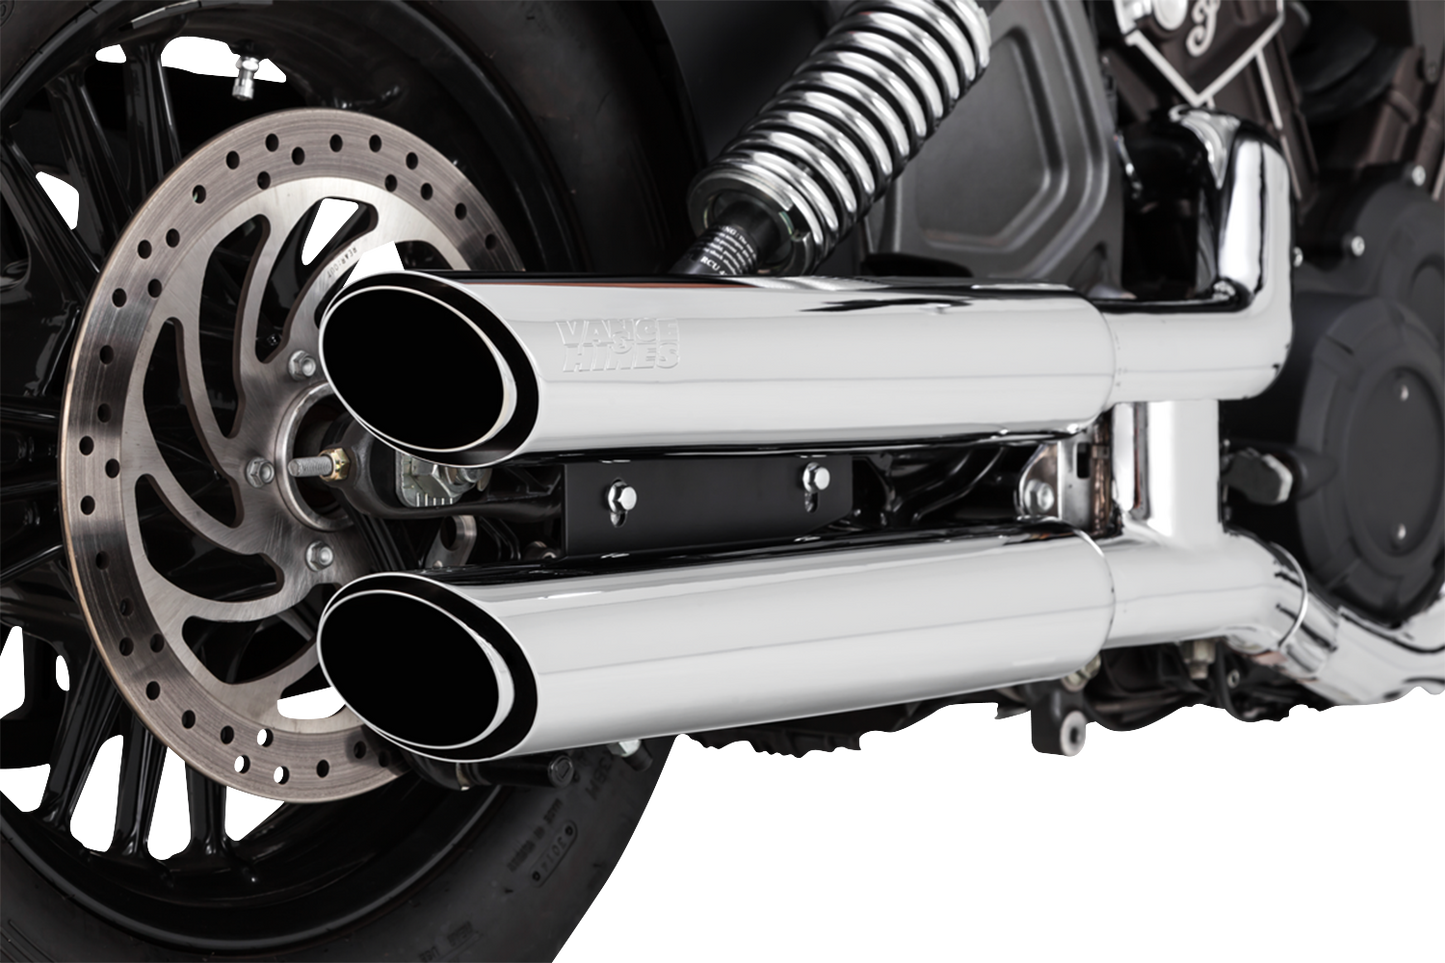 SCARICA VANCE & HINES TWIN SLASH 3 "Slip-ons Chrome per Scout indiano